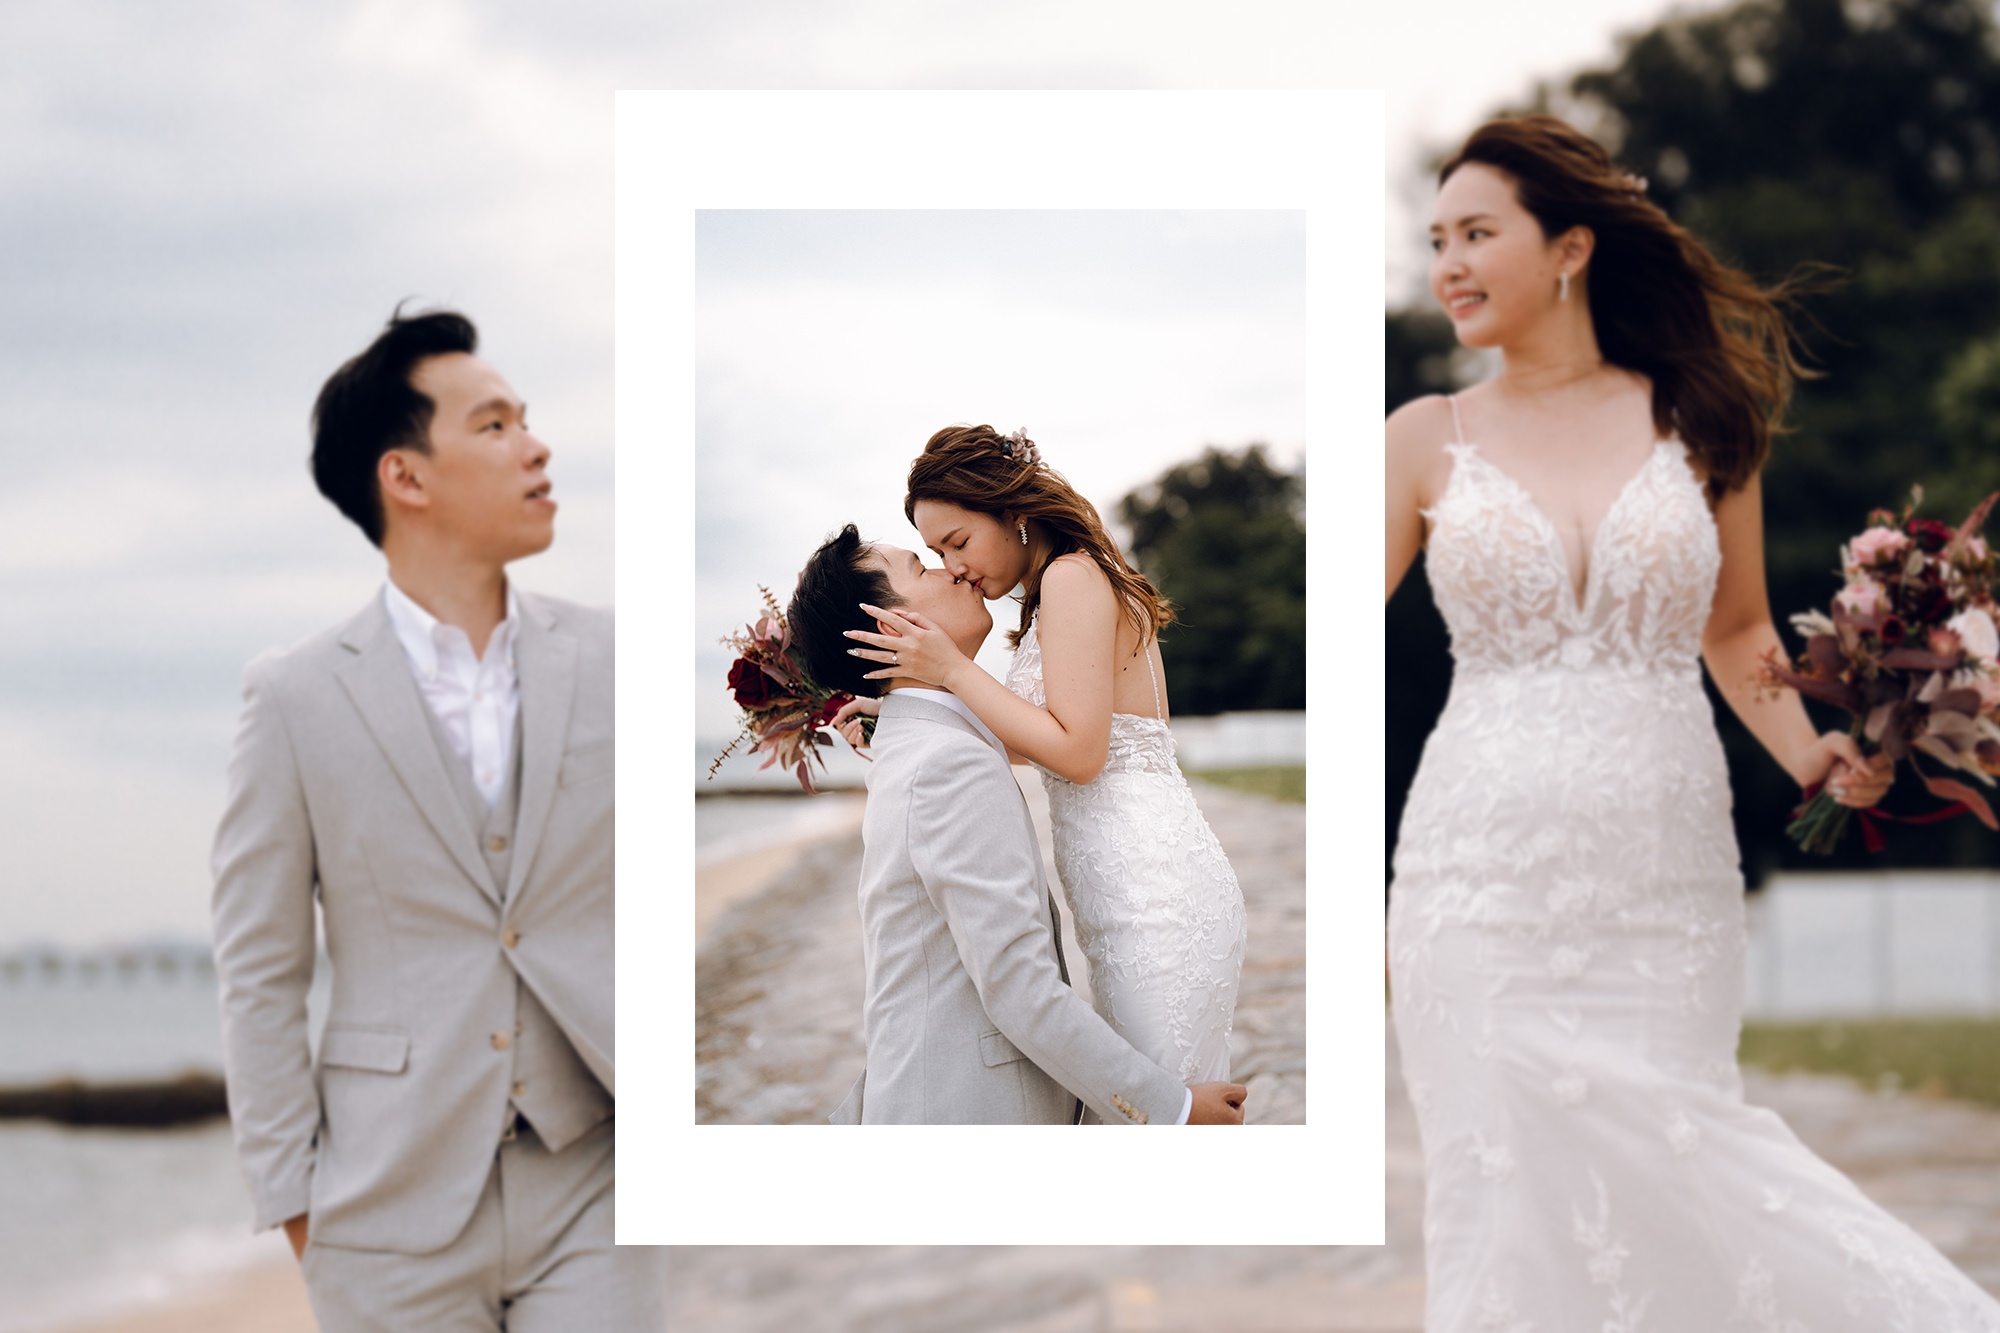 Prewedding Photoshoot At East Coast Park And Industrial Rooftop by Michael on OneThreeOneFour 13